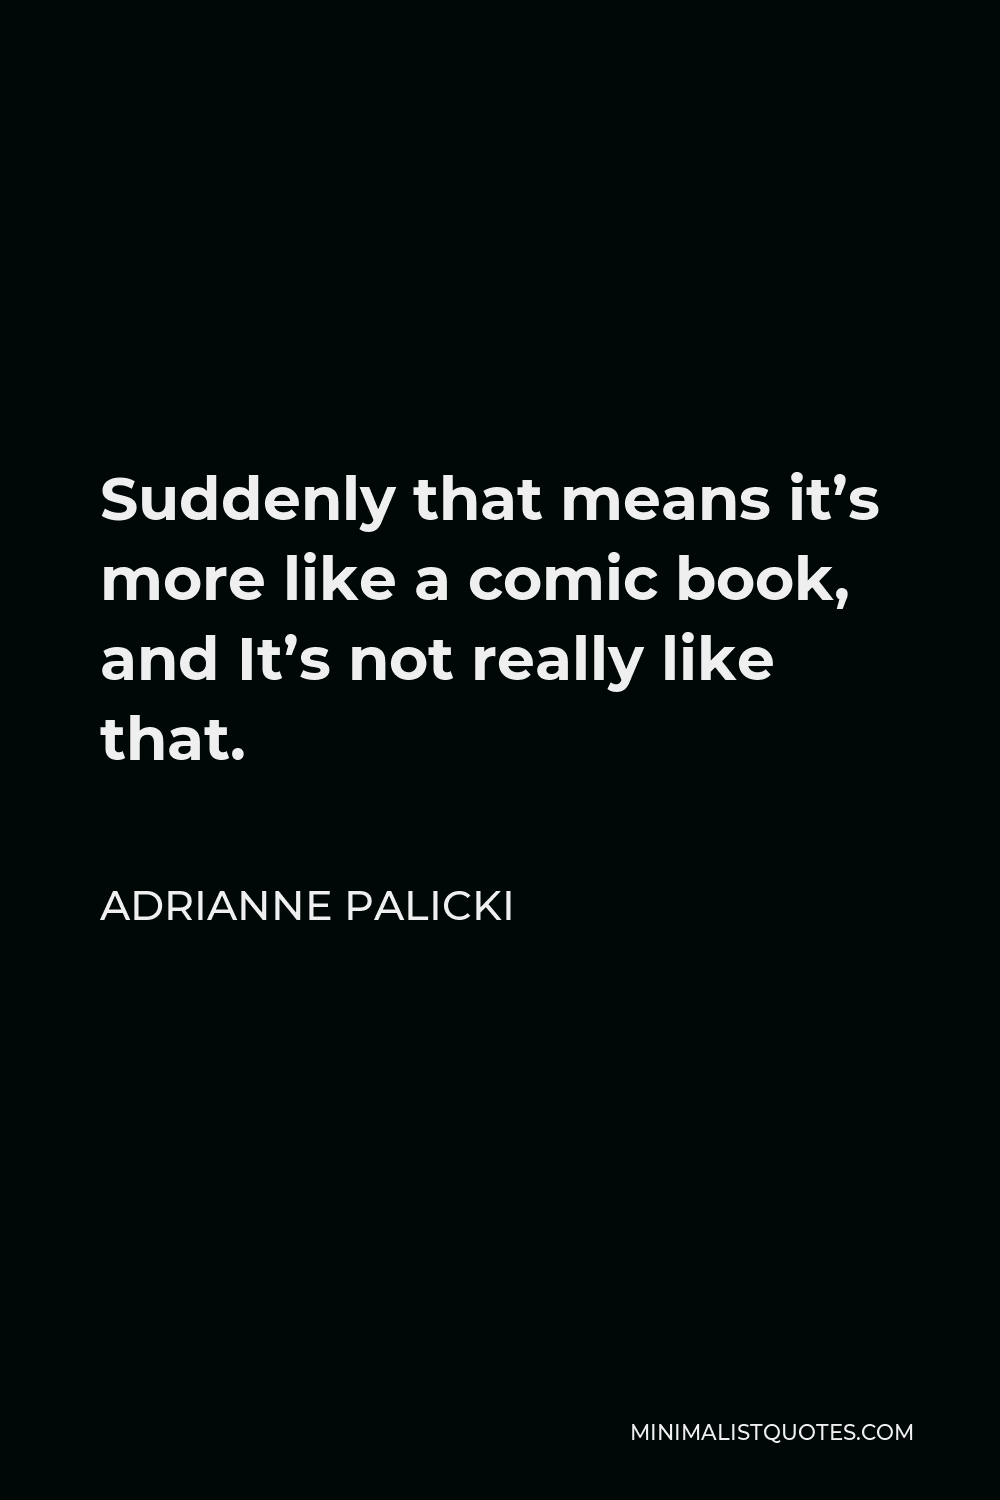 Adrianne Palicki Quote - Suddenly that means it’s more like a comic book, and It’s not really like that.